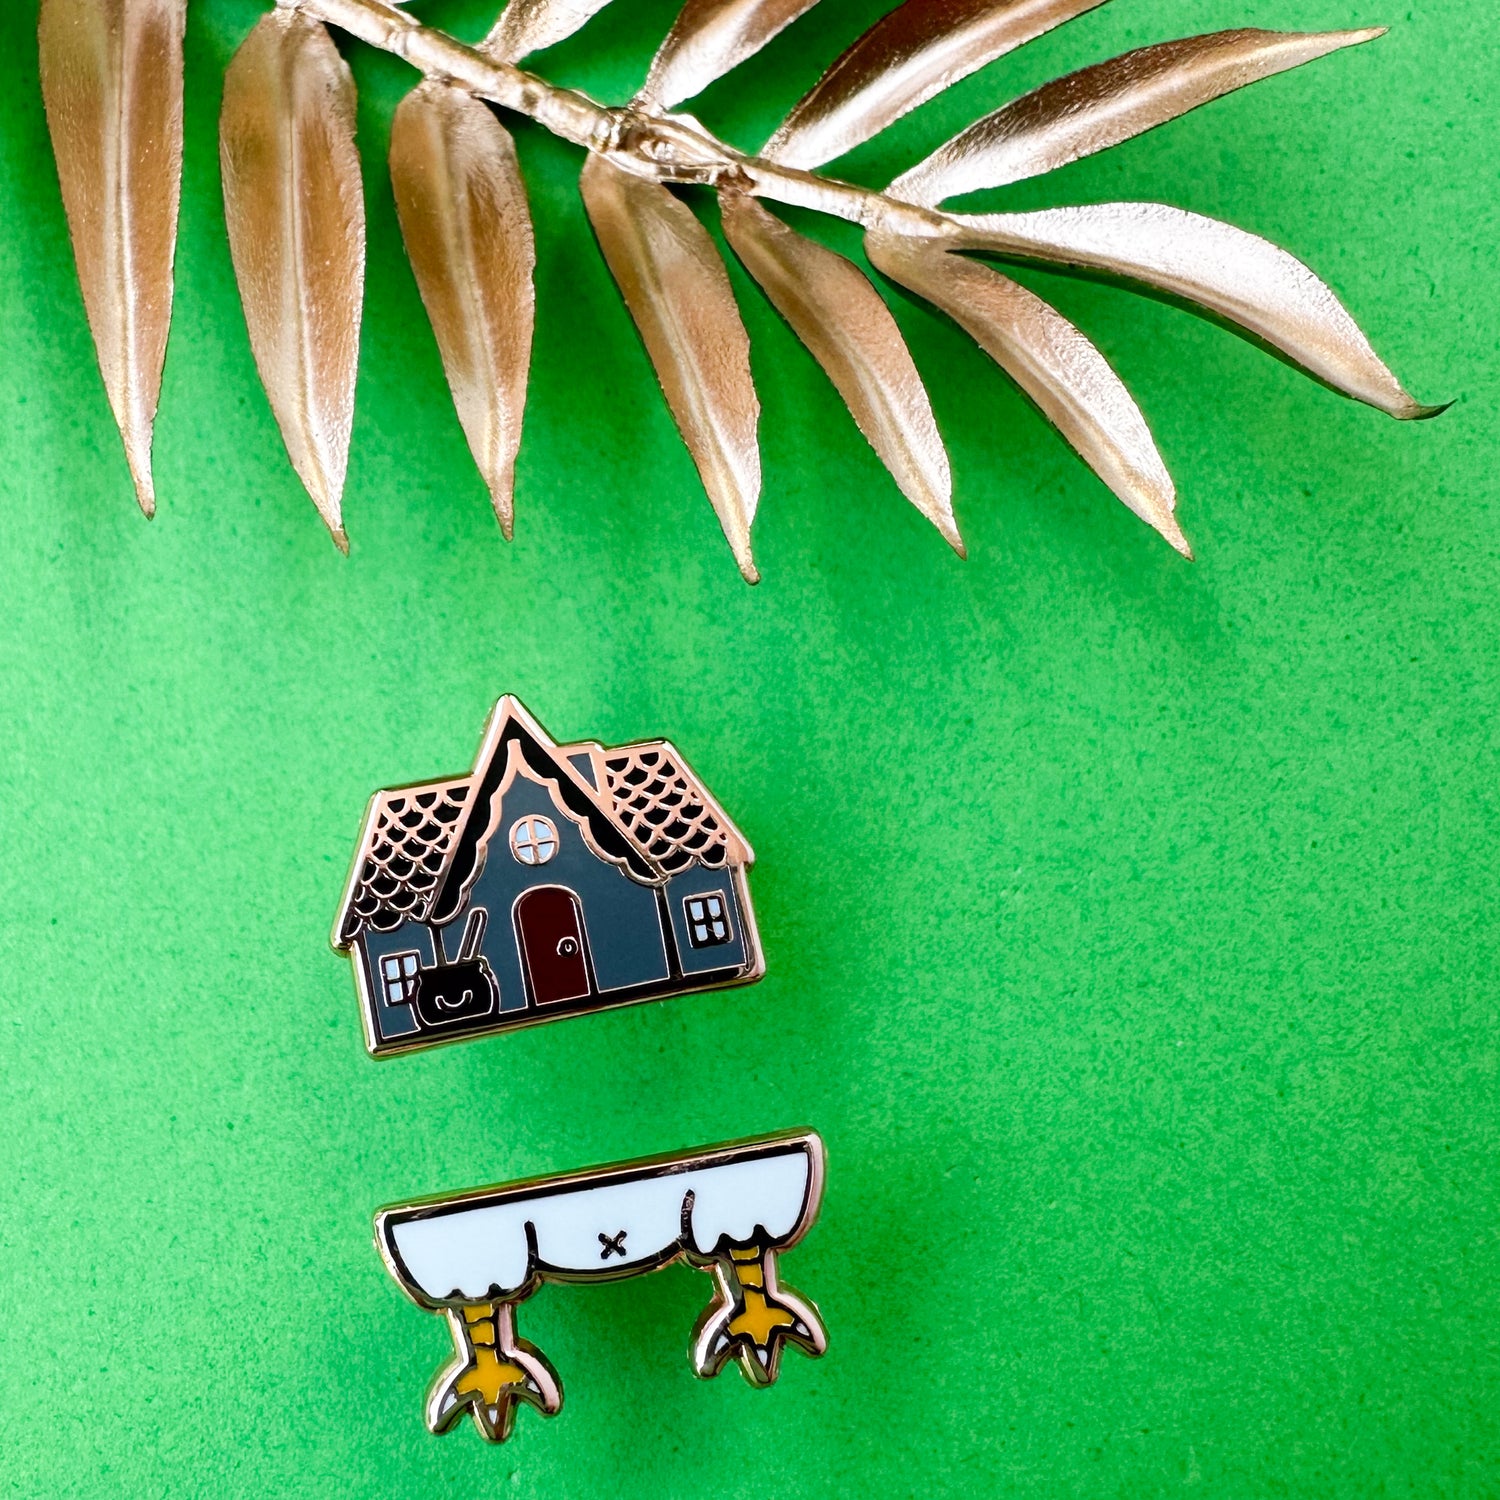 Two baba Yaga's house pins, the top pin is a grey house with a cauldron and the bottom is white chicken legs. The pins are on a green background with gold leaves.